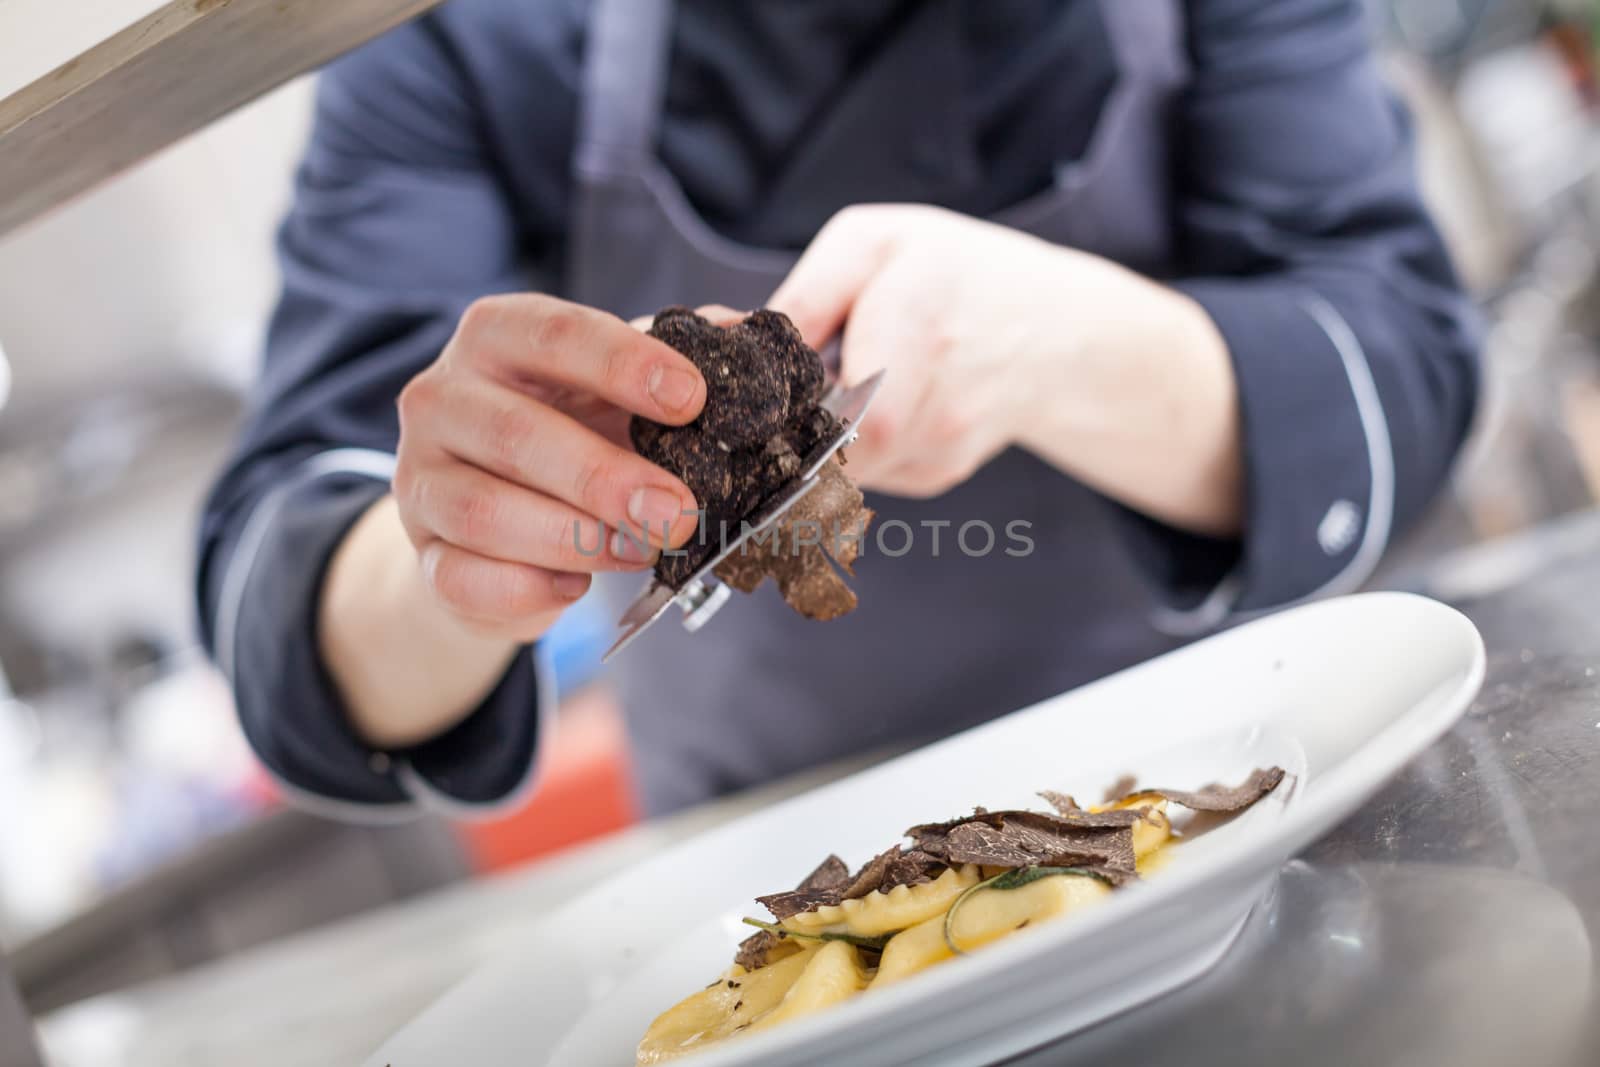 Chef grating truffle mushroom shavings onto homemade ravioli in a restaurant kitchen while preparing a dinner, close up view of the counter, plate and hands